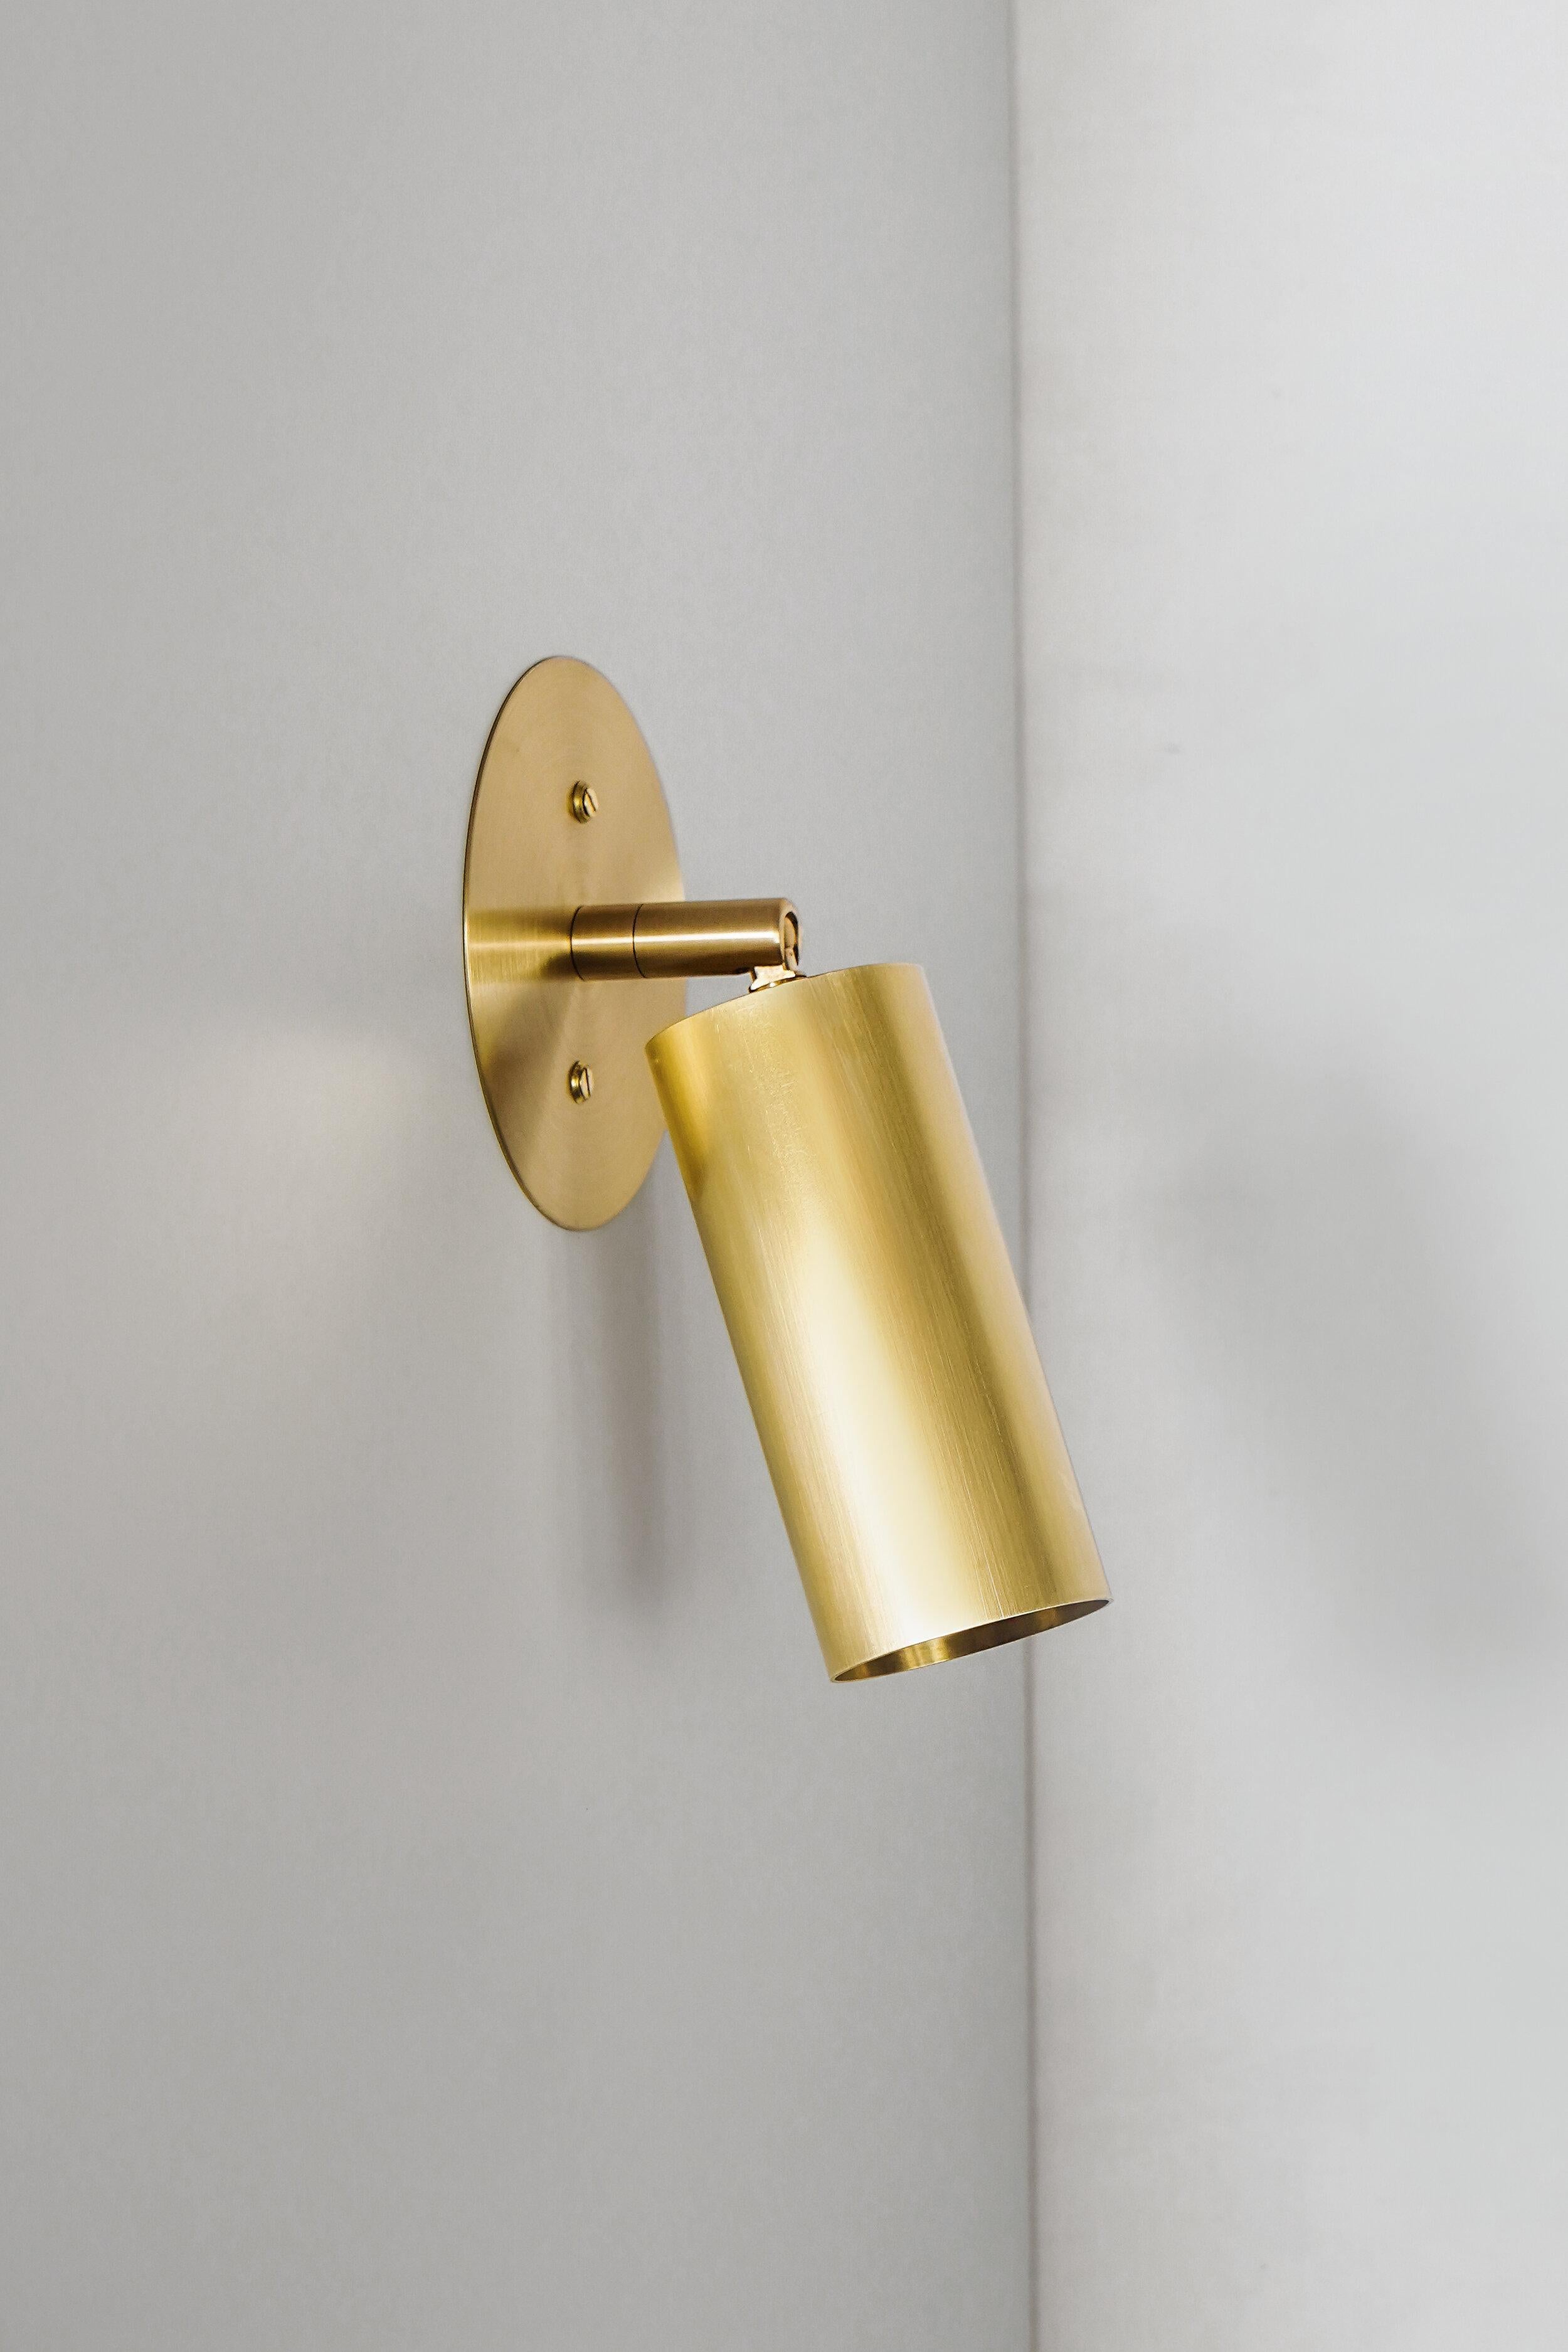 Book XL wall light by Contain
Dimensions: D 6 x W 6 x H 19.5 cm 
Materials: brass.
Available in different finishes. 

All our lamps can be wired according to each country. If sold to the USA it will be wired for the USA for instance.

“You